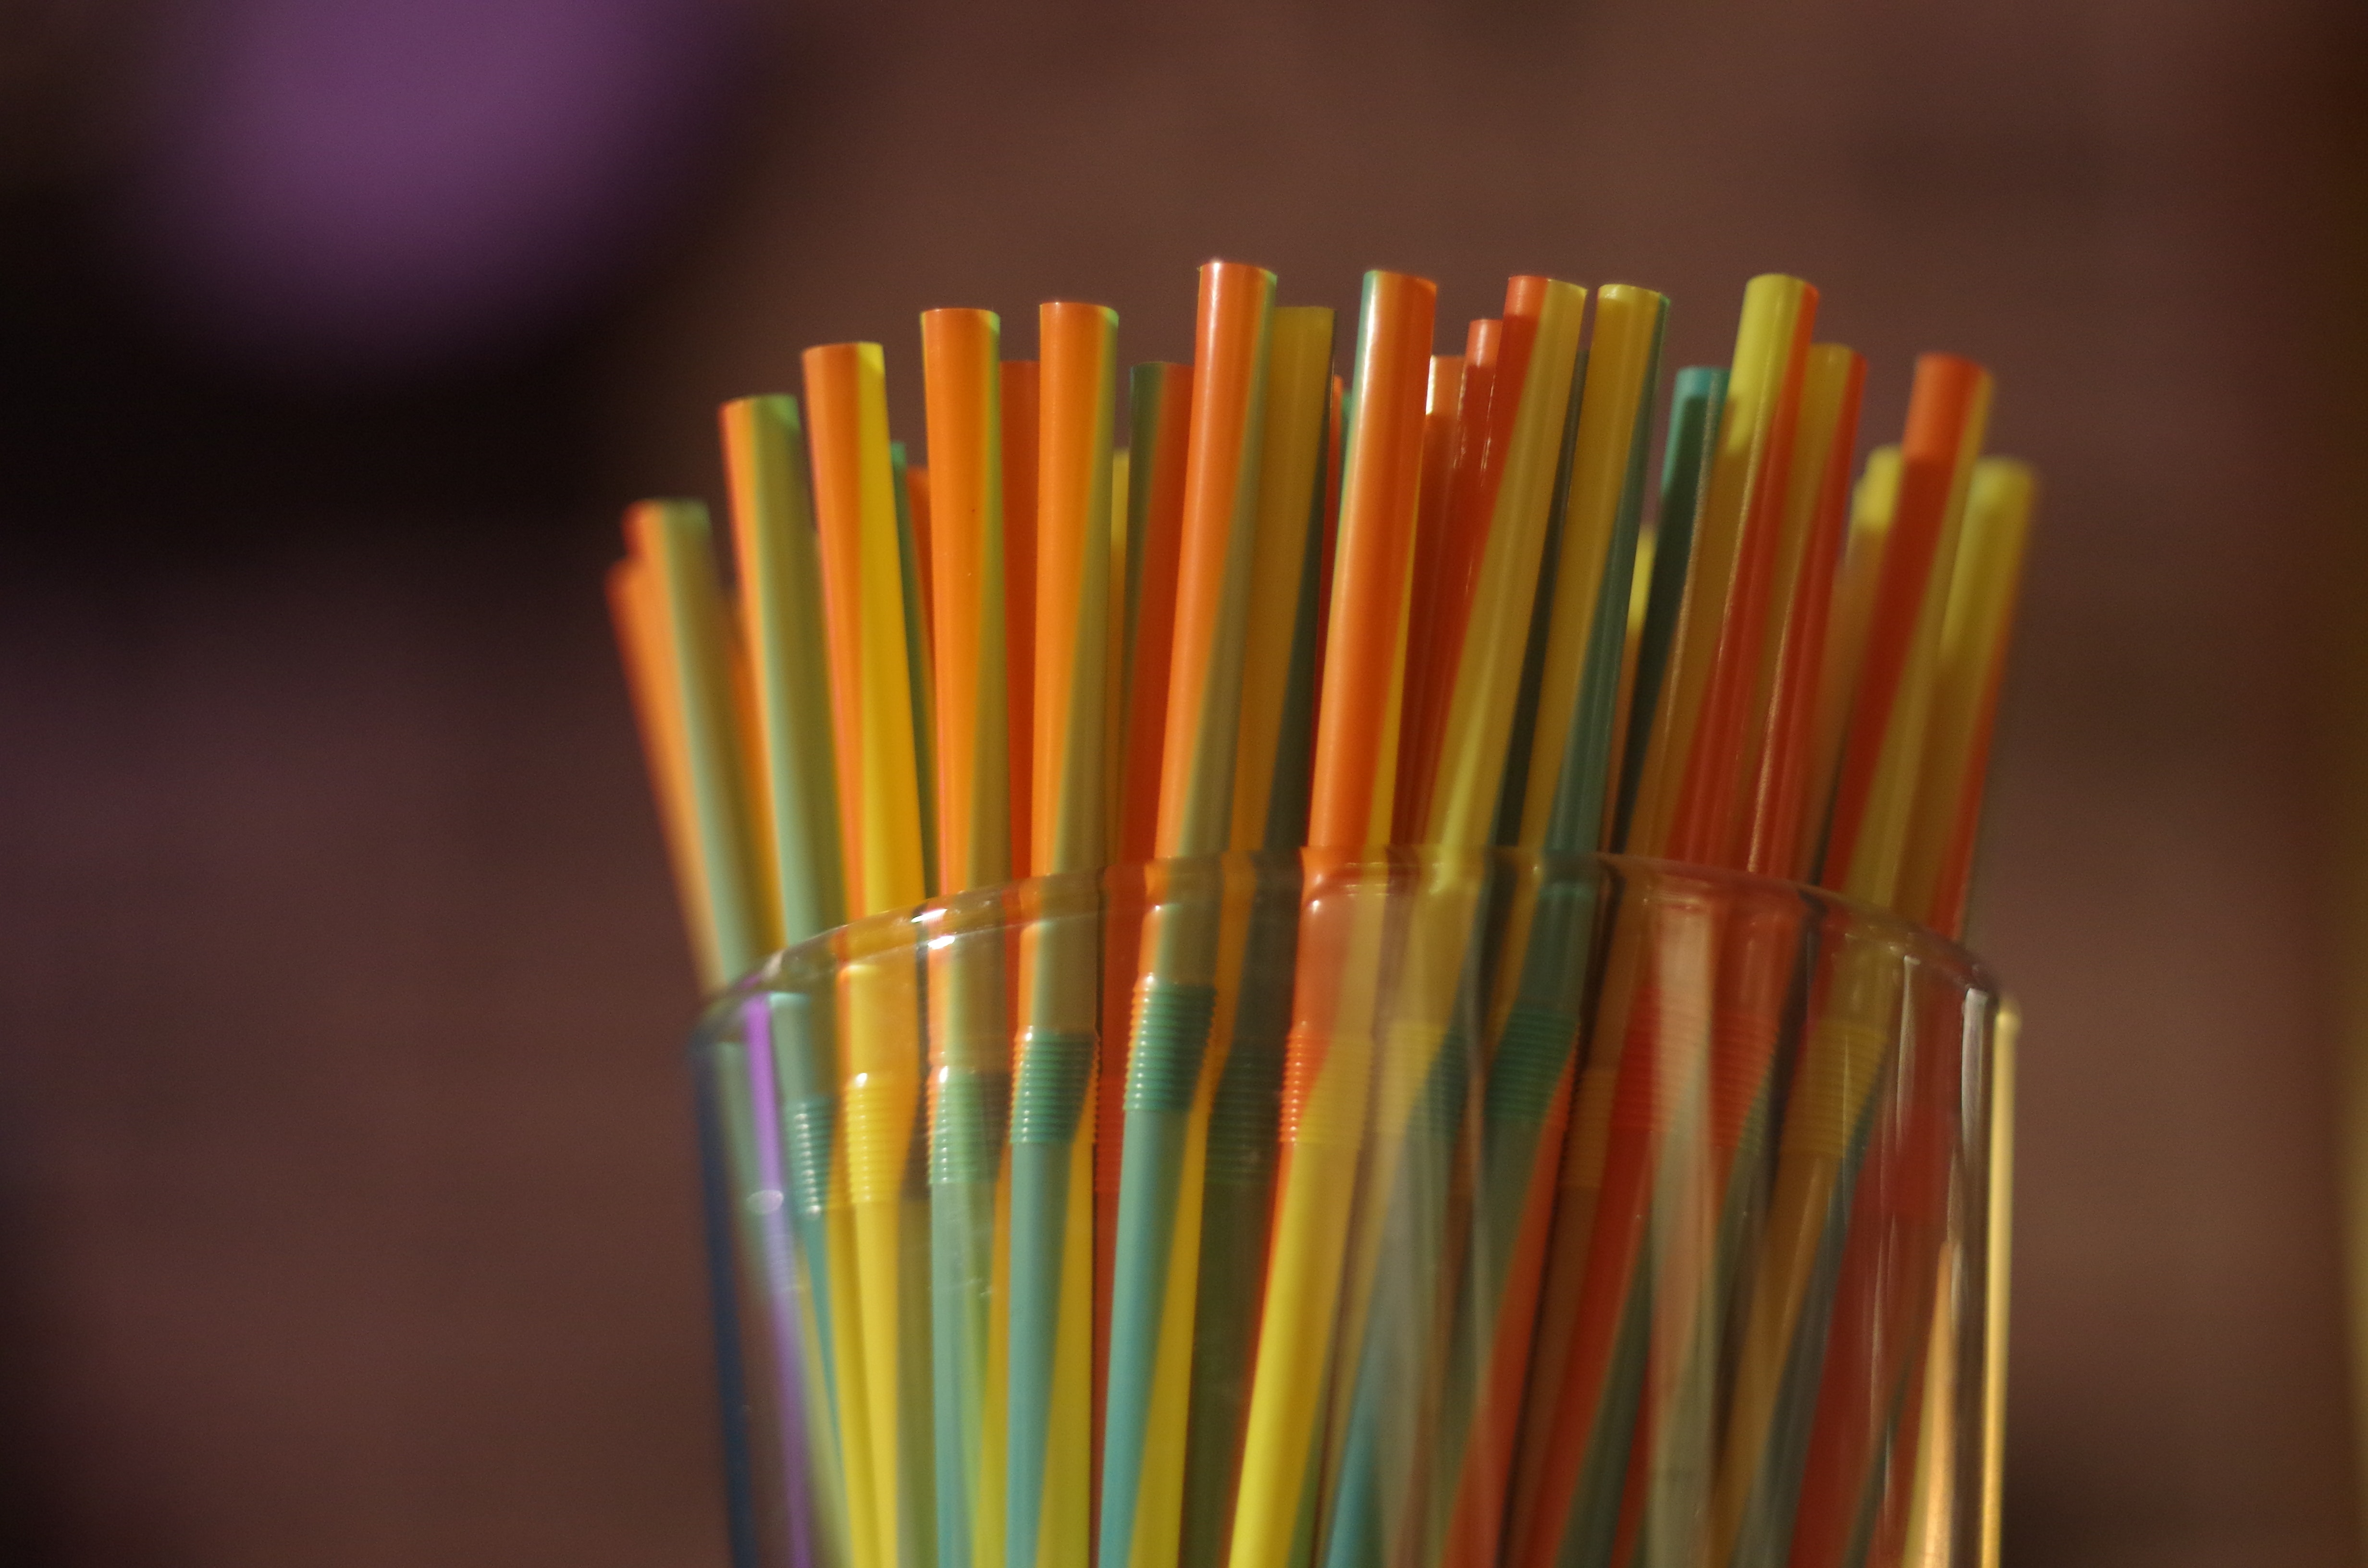 Elior to remove more than 1 million single-use straws as part of its new Plastics Policy